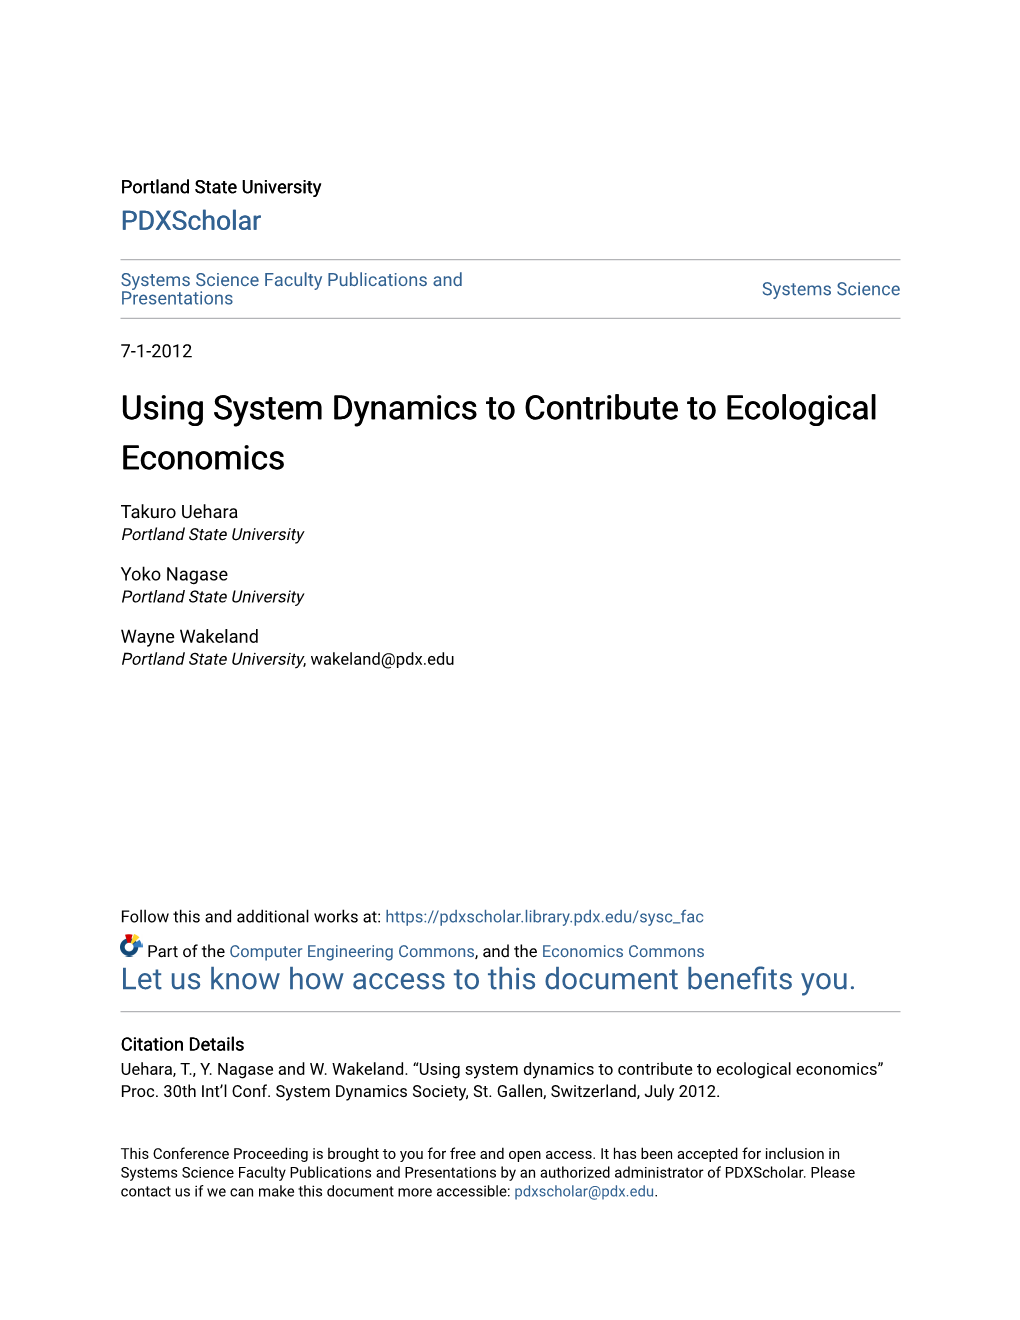 Using System Dynamics to Contribute to Ecological Economics